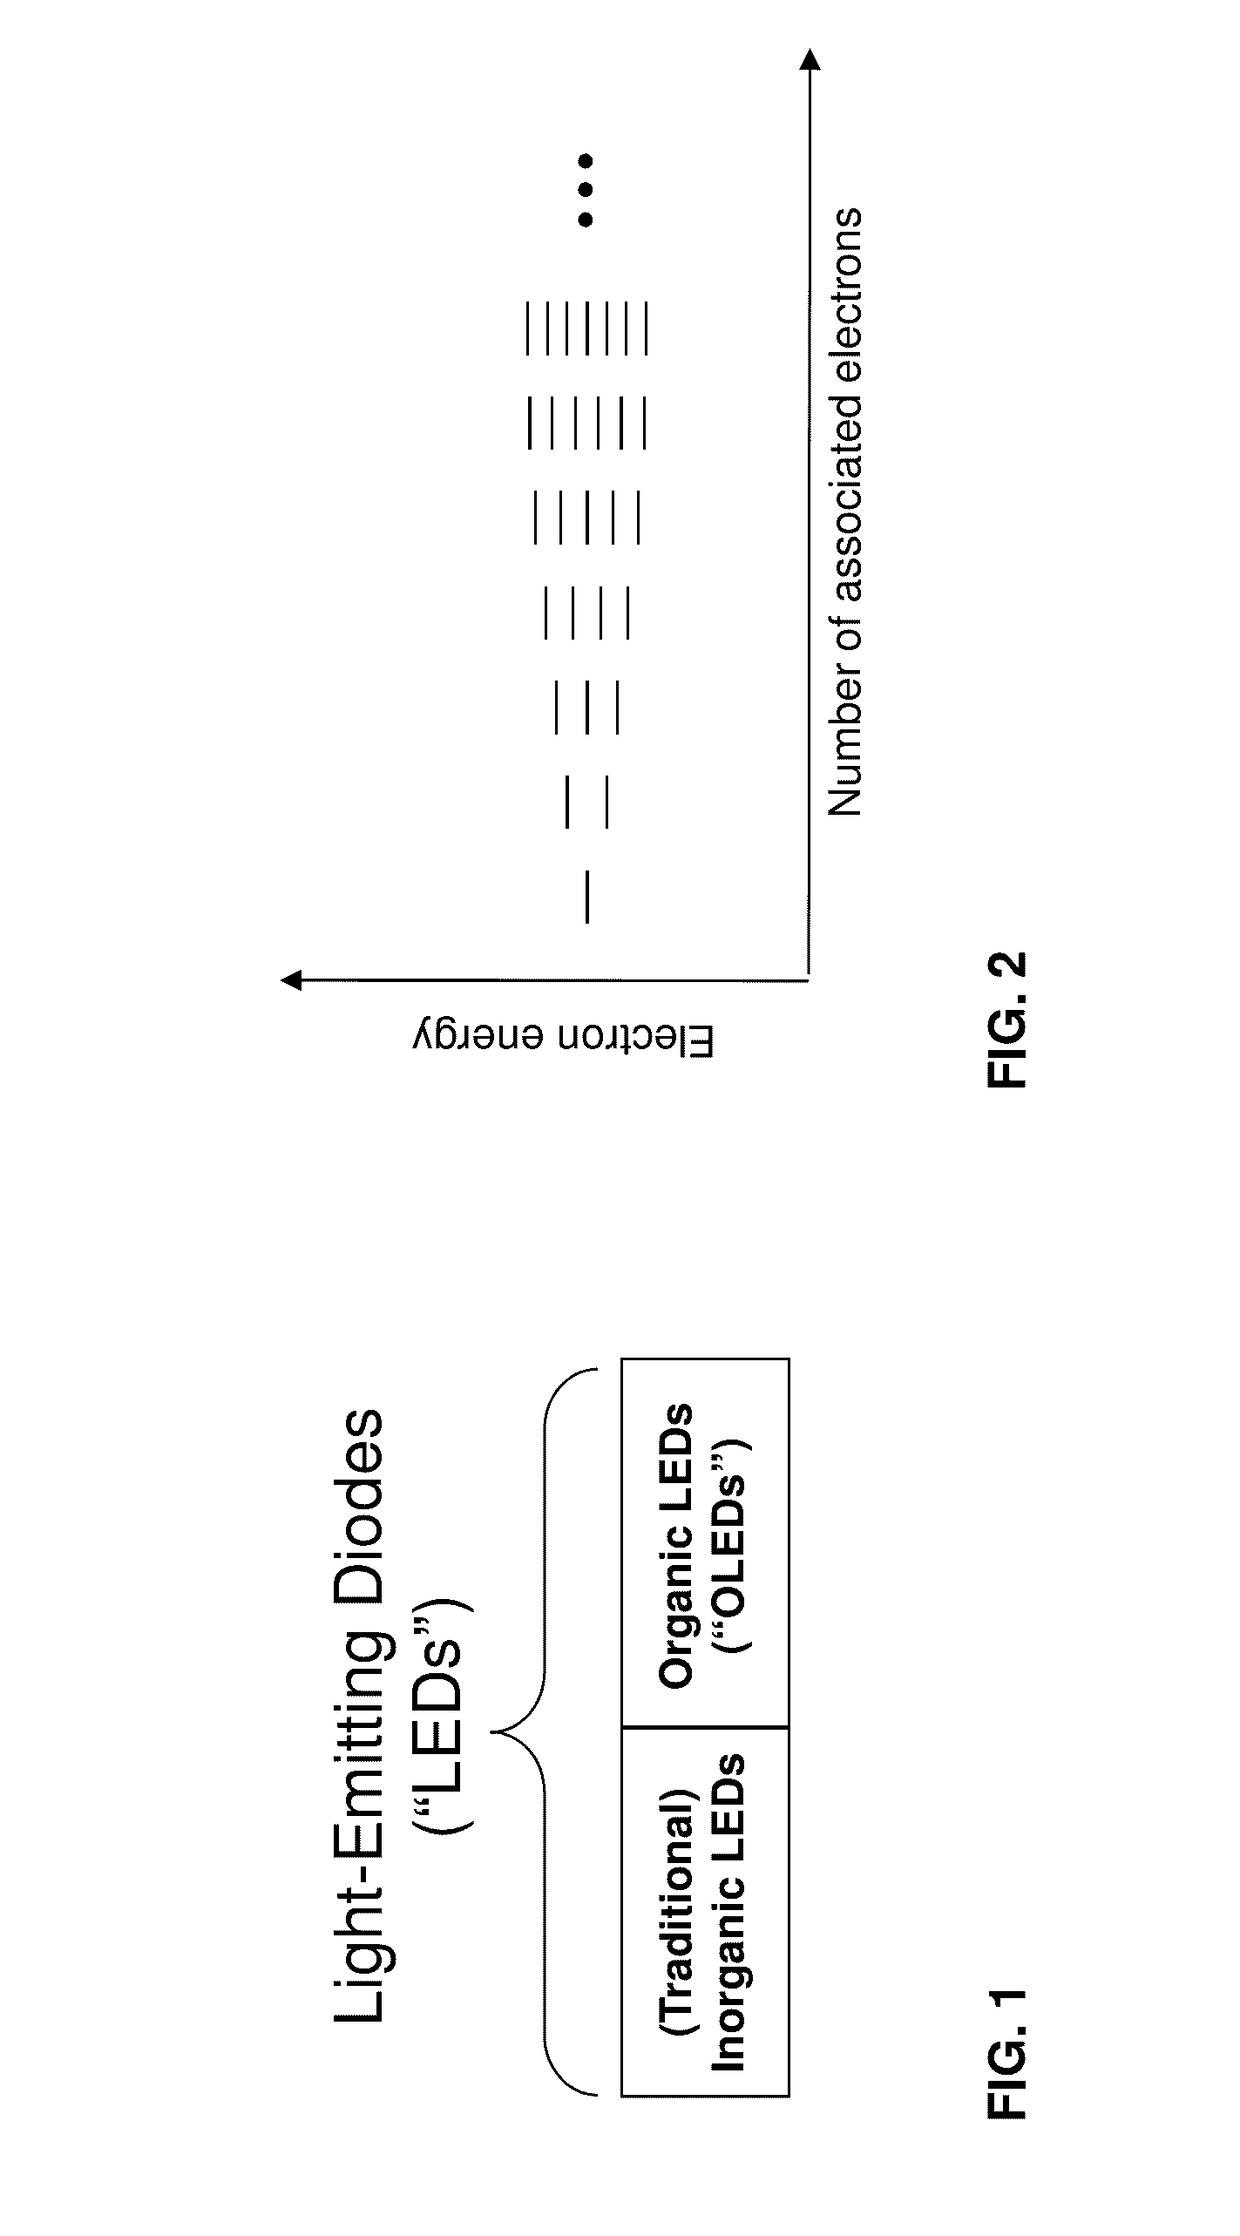 Use of LED or OLED array to implement integrated combinations of touch screen tactile, touch gesture sensor, color image display, hand-image gesture sensor, document scanner, secure optical data exchange, and fingerprint processing capabilities